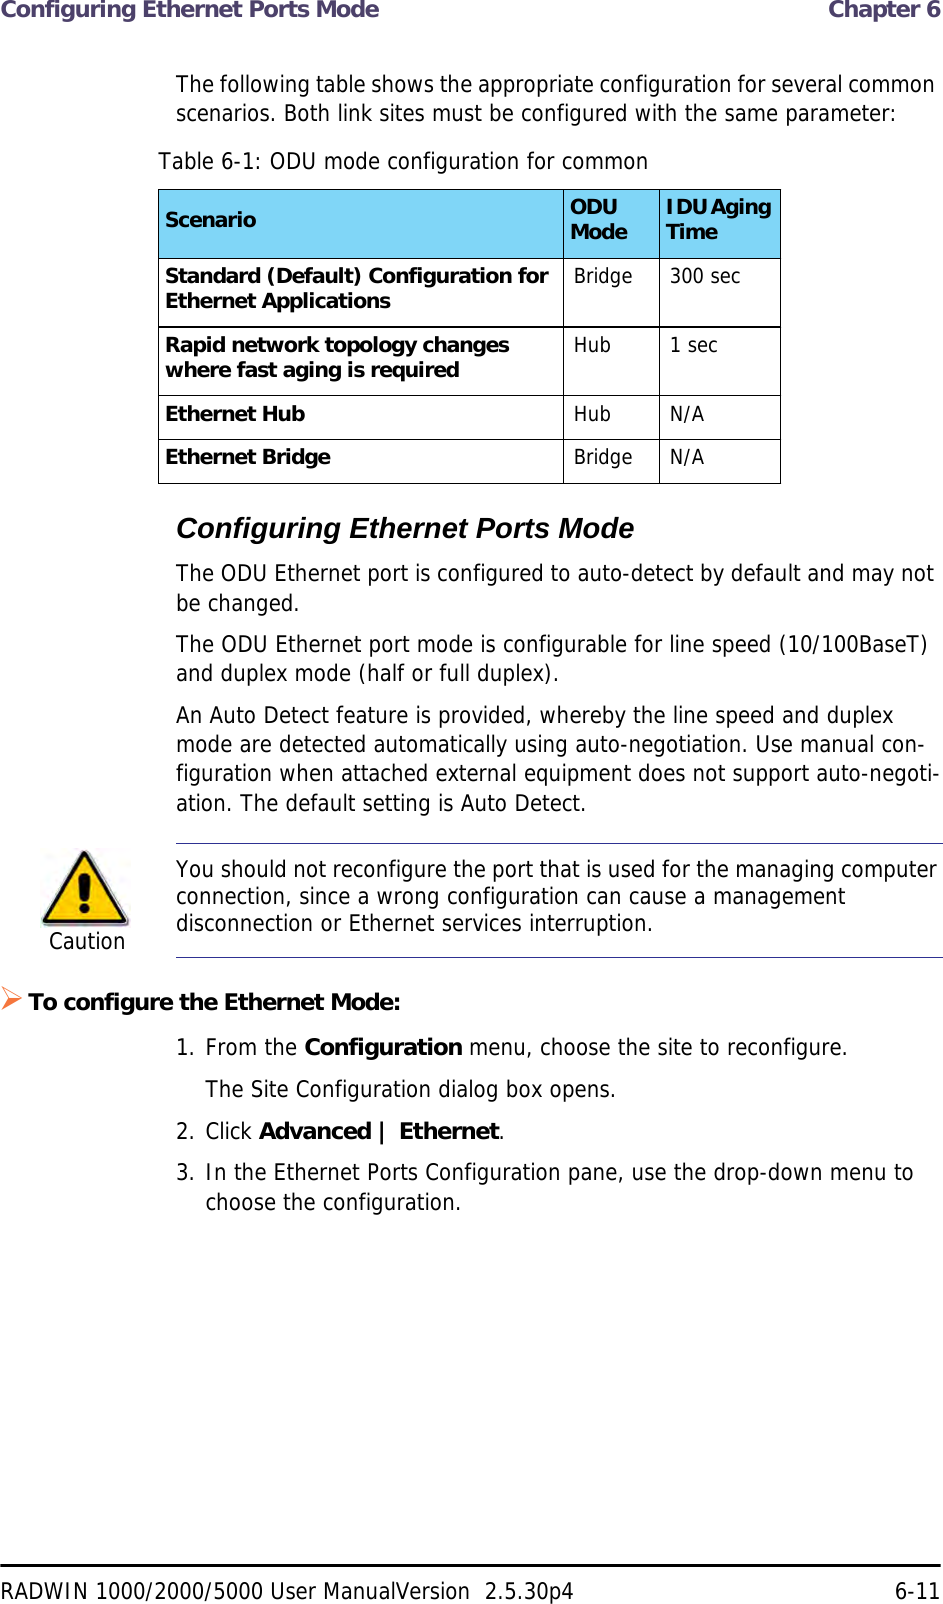 Configuring Ethernet Ports Mode  Chapter 6RADWIN 1000/2000/5000 User ManualVersion  2.5.30p4 6-11The following table shows the appropriate configuration for several common scenarios. Both link sites must be configured with the same parameter:Configuring Ethernet Ports ModeThe ODU Ethernet port is configured to auto-detect by default and may not be changed.The ODU Ethernet port mode is configurable for line speed (10/100BaseT) and duplex mode (half or full duplex).An Auto Detect feature is provided, whereby the line speed and duplex mode are detected automatically using auto-negotiation. Use manual con-figuration when attached external equipment does not support auto-negoti-ation. The default setting is Auto Detect.To configure the Ethernet Mode:1. From the Configuration menu, choose the site to reconfigure.The Site Configuration dialog box opens.2. Click Advanced | Ethernet.3. In the Ethernet Ports Configuration pane, use the drop-down menu to choose the configuration.Table 6-1: ODU mode configuration for commonScenario ODU Mode IDU Aging TimeStandard (Default) Configuration for Ethernet Applications Bridge 300 secRapid network topology changes where fast aging is required Hub 1 secEthernet Hub Hub N/AEthernet Bridge Bridge N/ACautionYou should not reconfigure the port that is used for the managing computer connection, since a wrong configuration can cause a management disconnection or Ethernet services interruption.